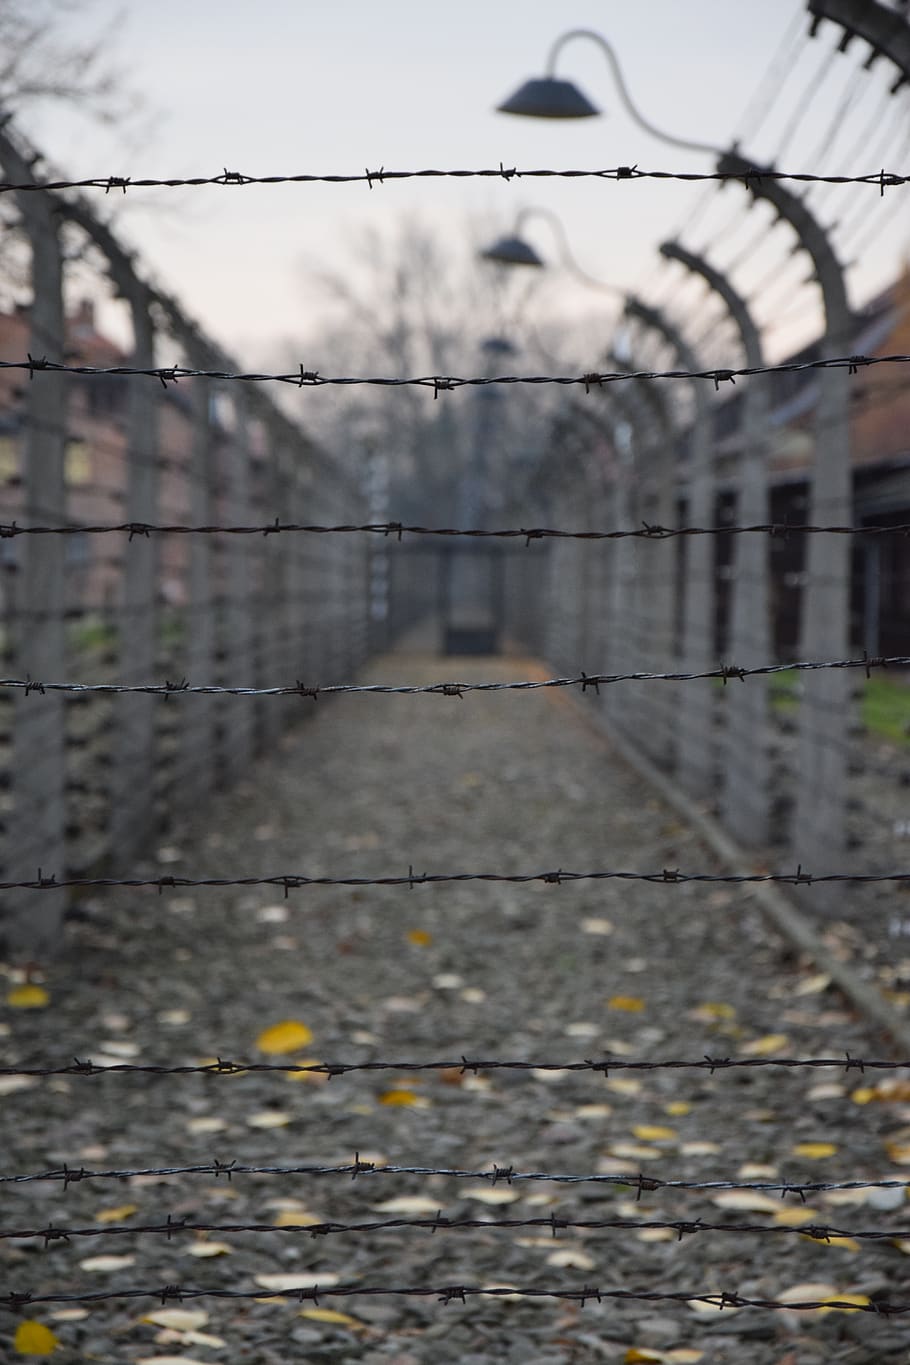 german death camp, auschwitz, history, concentration camp, labour camp, gateway, death valley, barbed wire, the fence, safety